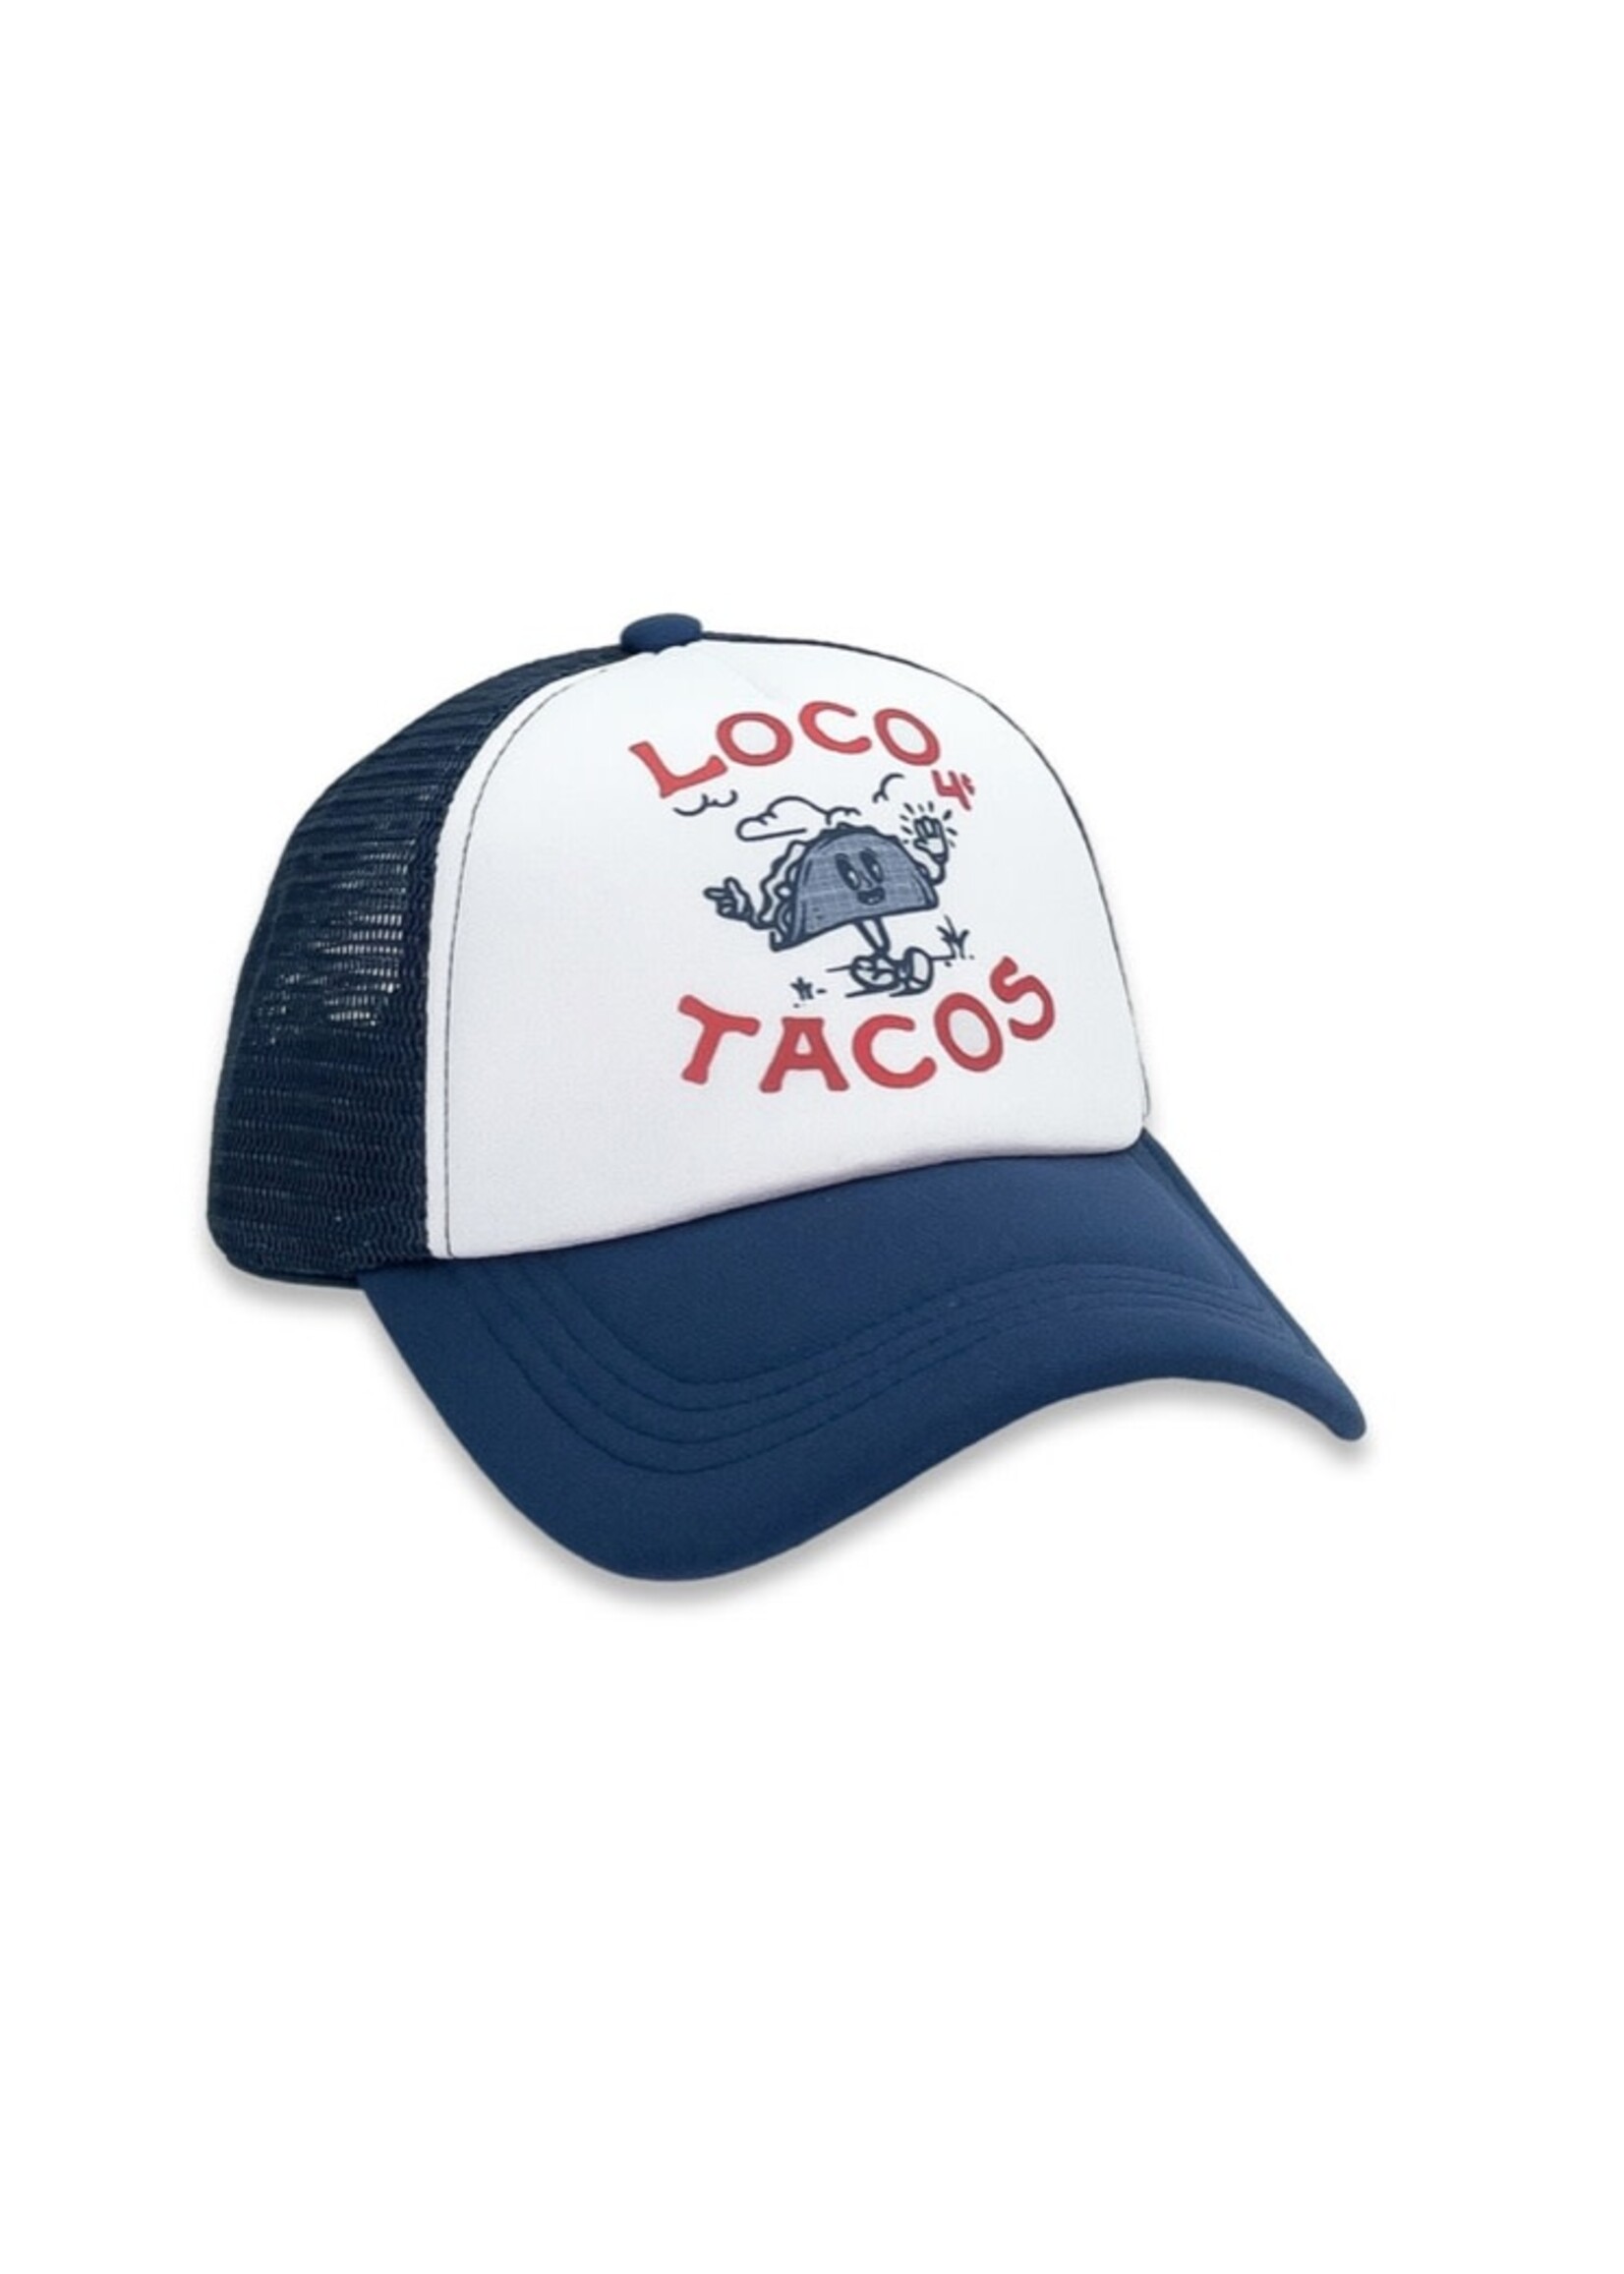 Feather 4 Arrow Feather 4 Arrow, Loco 4 Tacos Hat || Navy / White